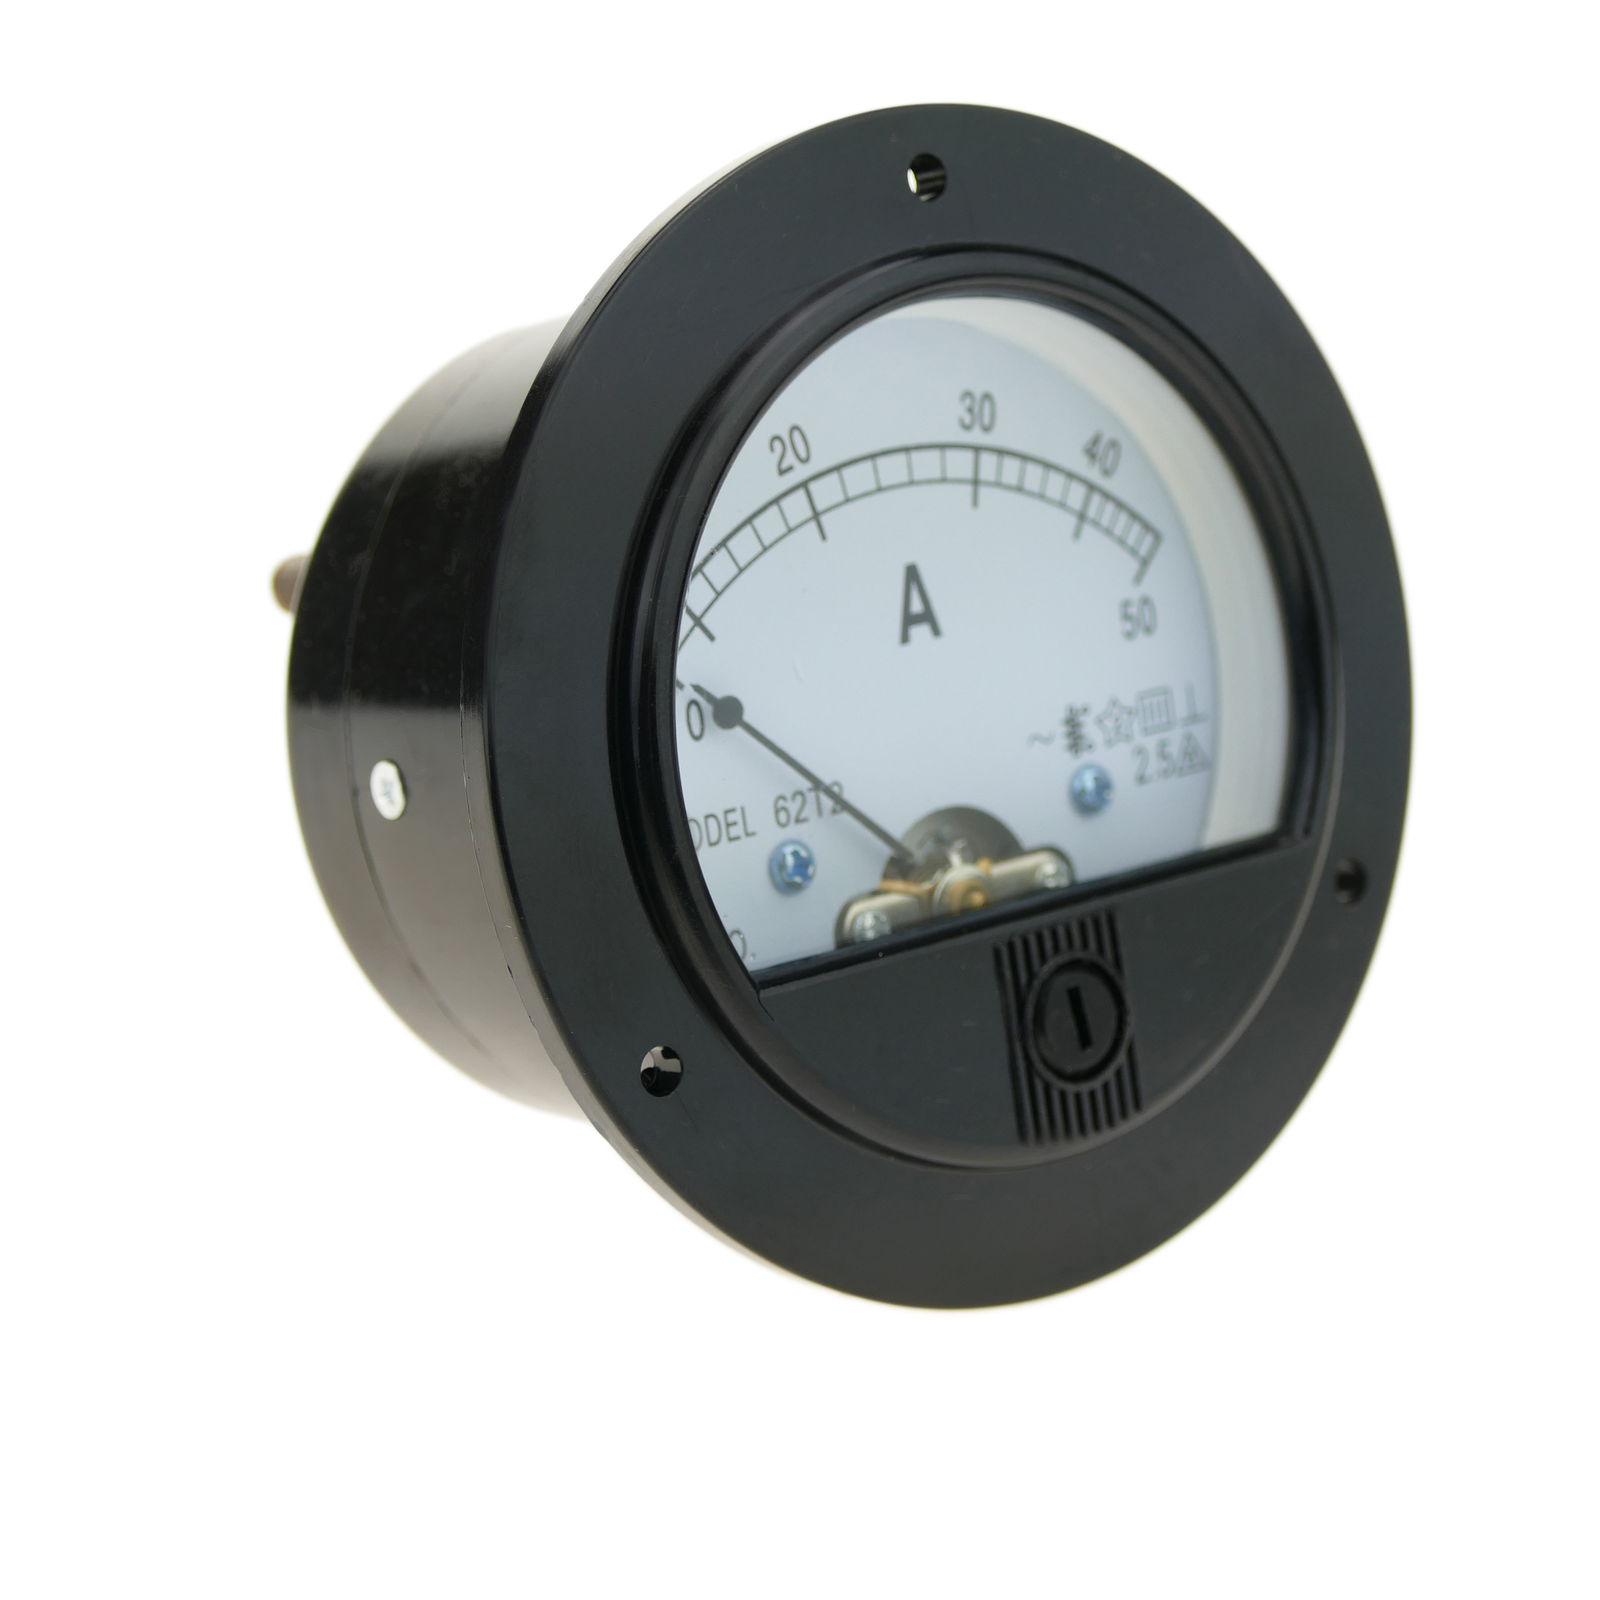 Analog electric meter panel round 70mm 50A ammeter - Cablematic